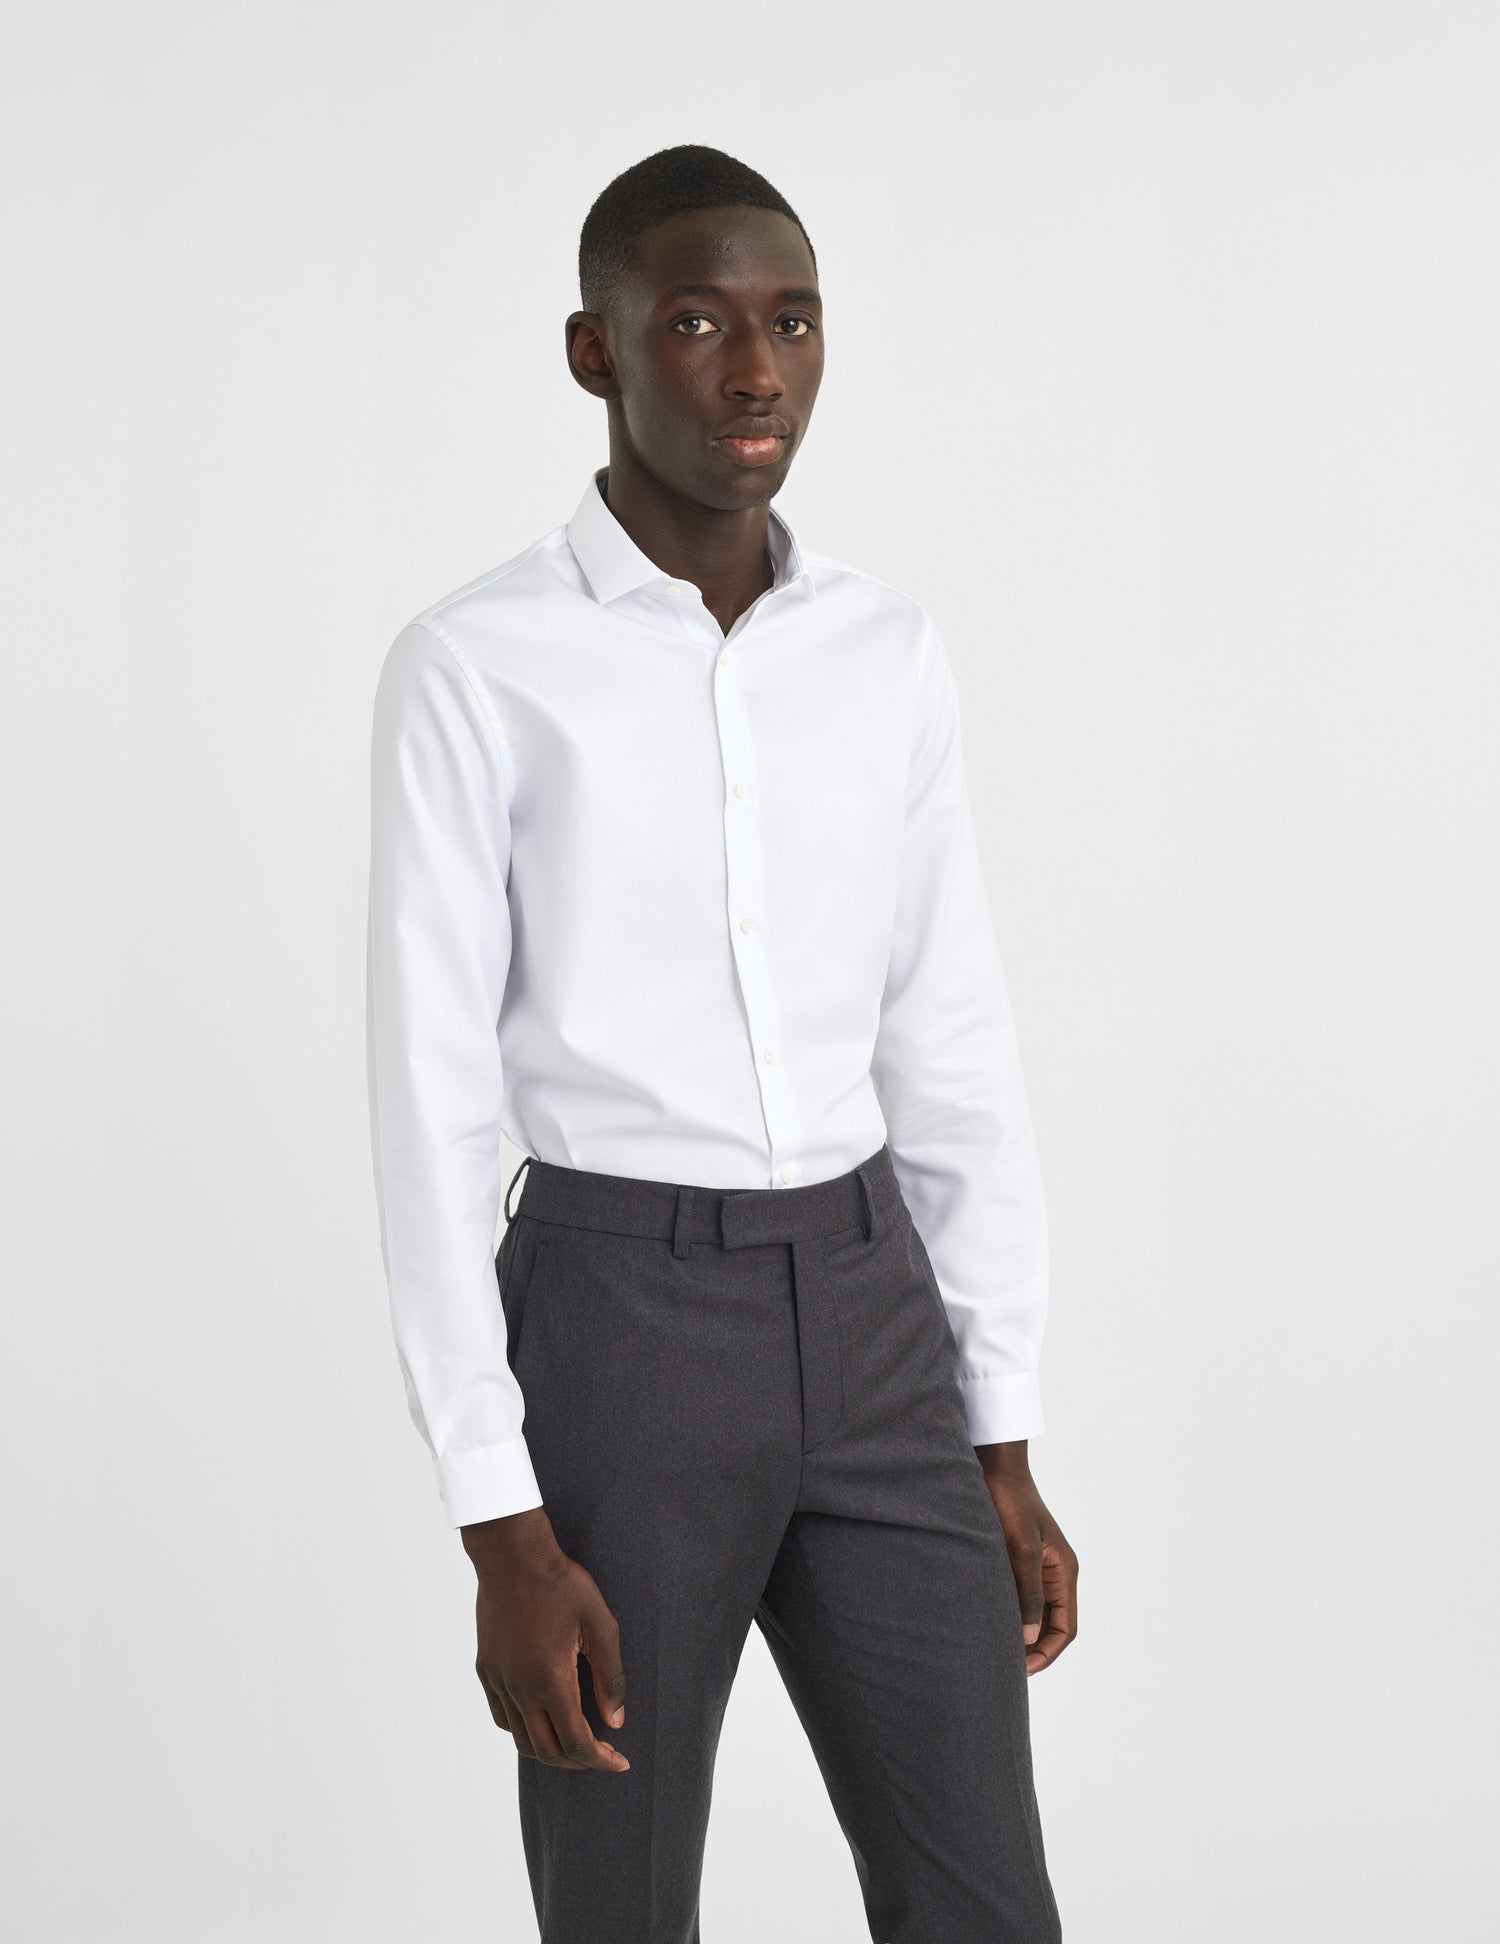 Fitted white shirt - Shaped - Thin Collar#3